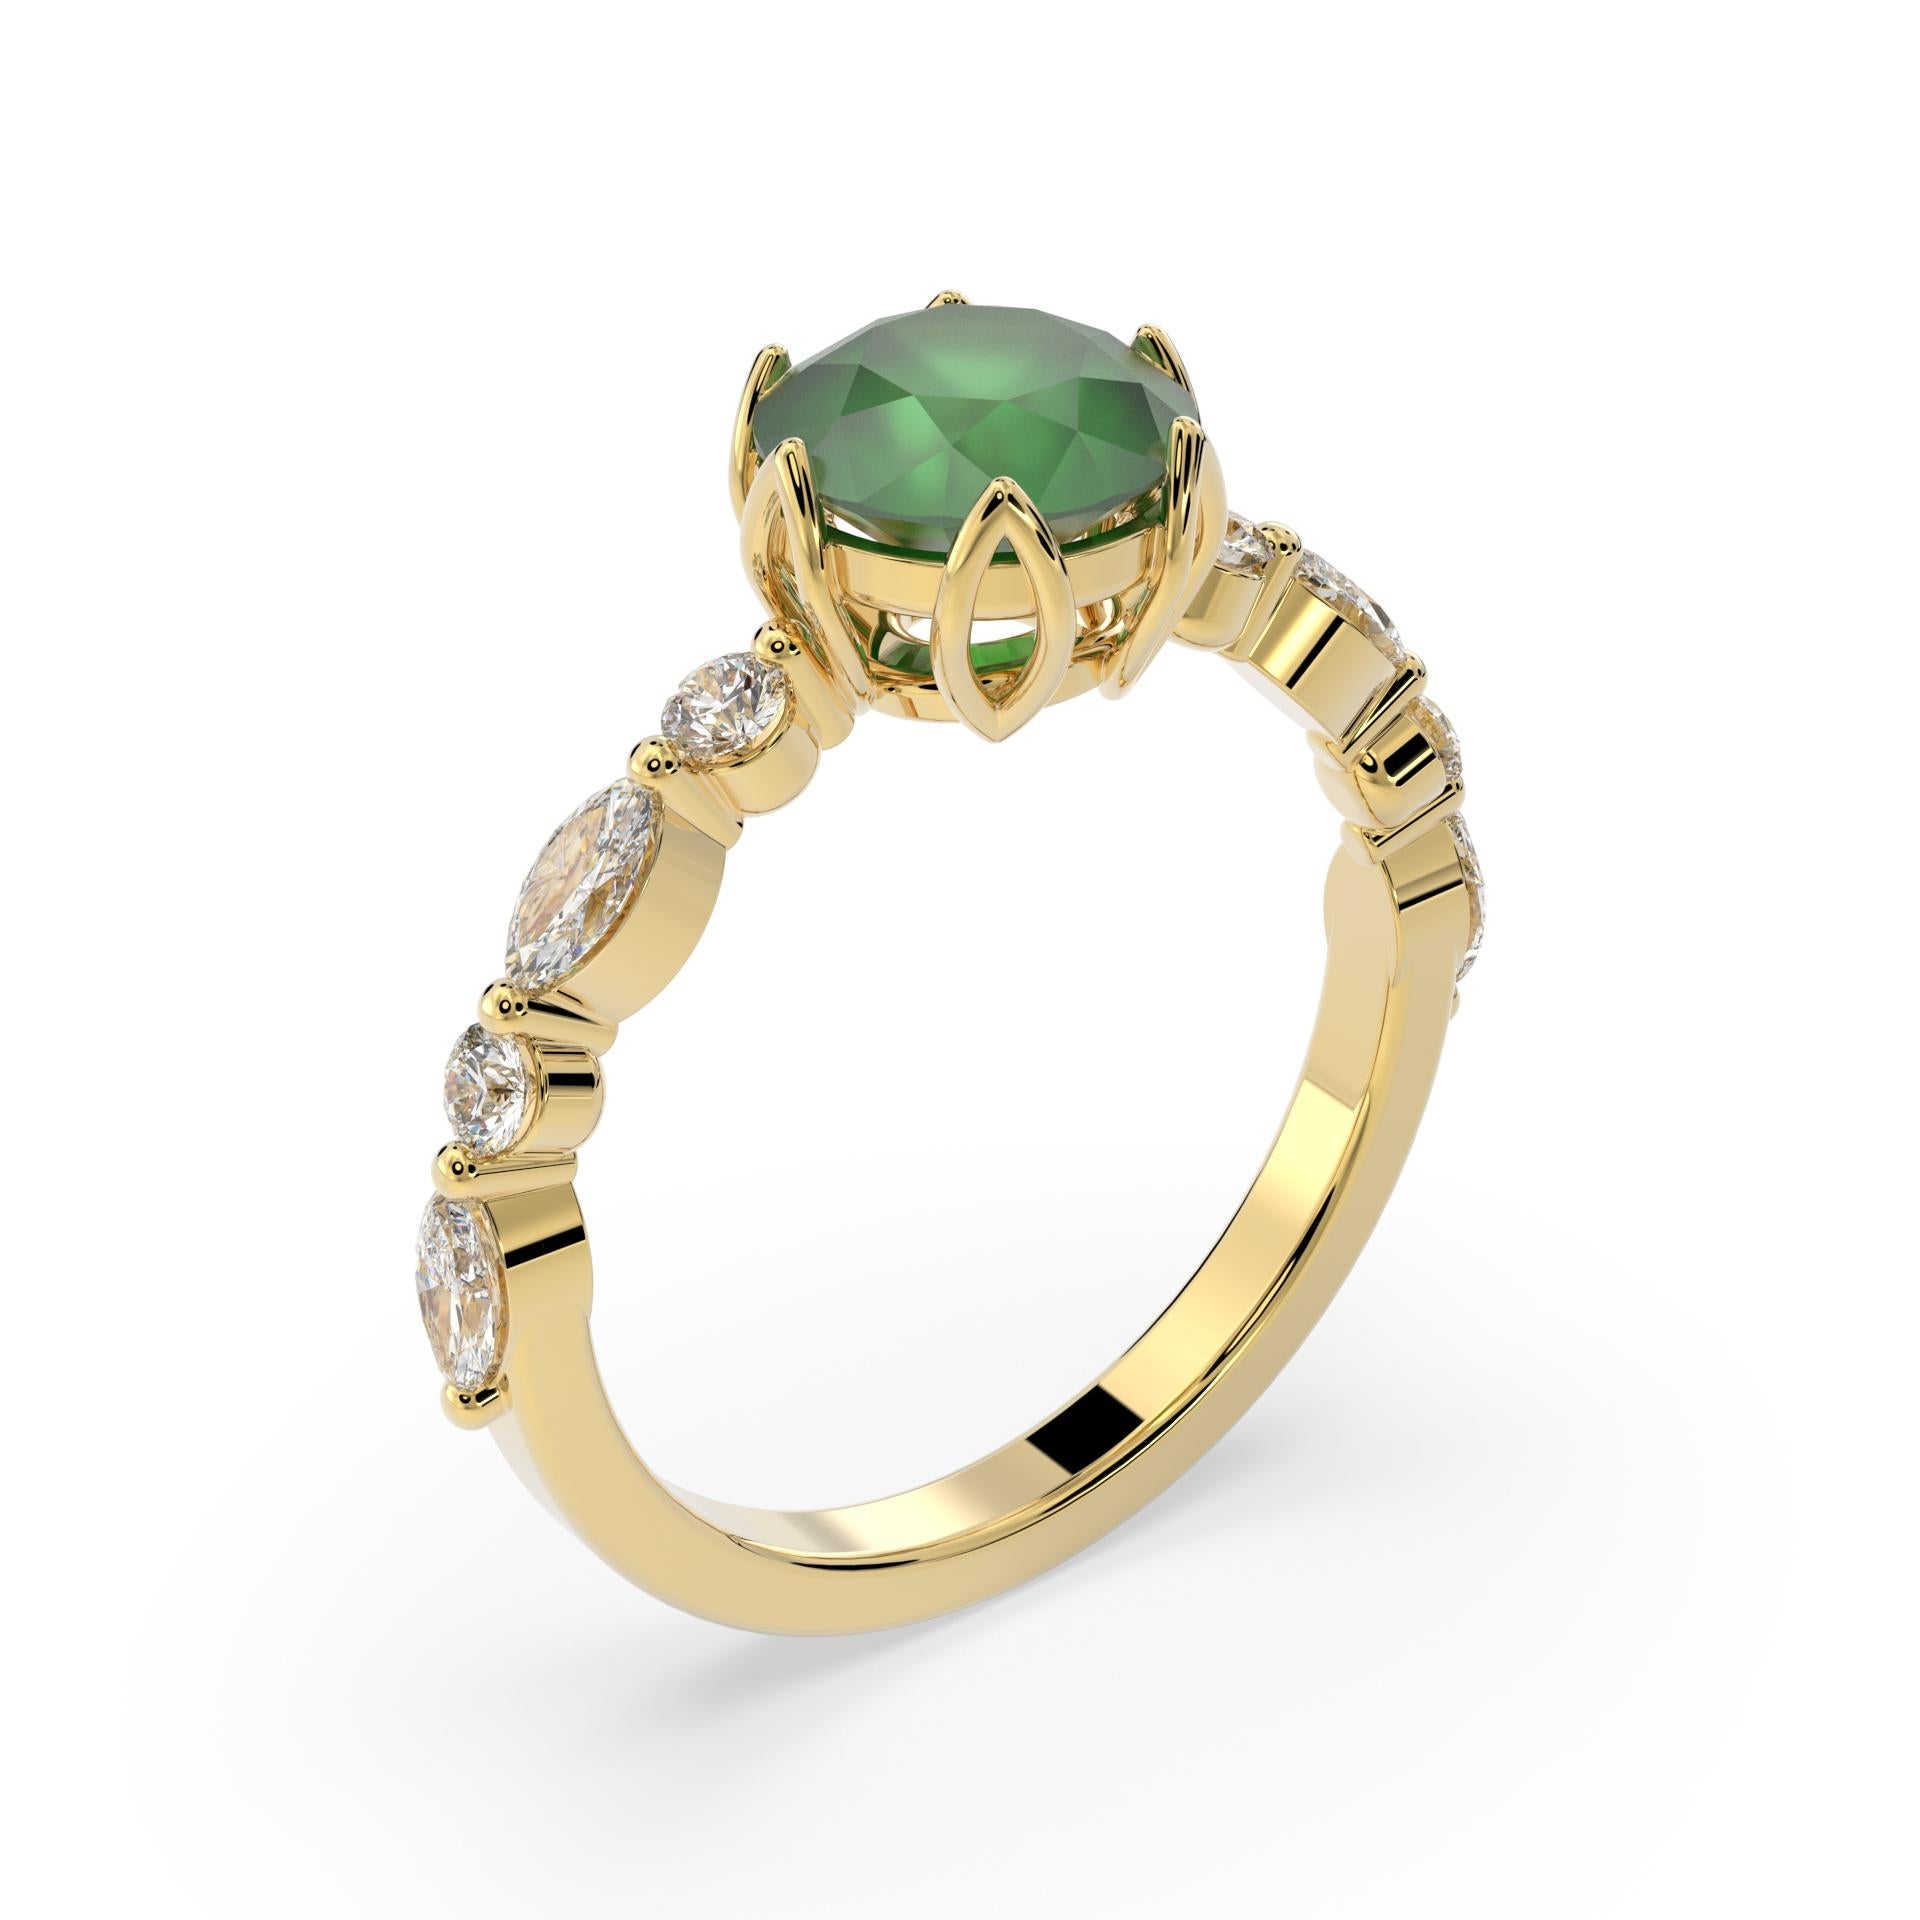 For Sale:  Green Emerald Engagement Ring with Round and Marquise Diamonds set in 18K gold 2